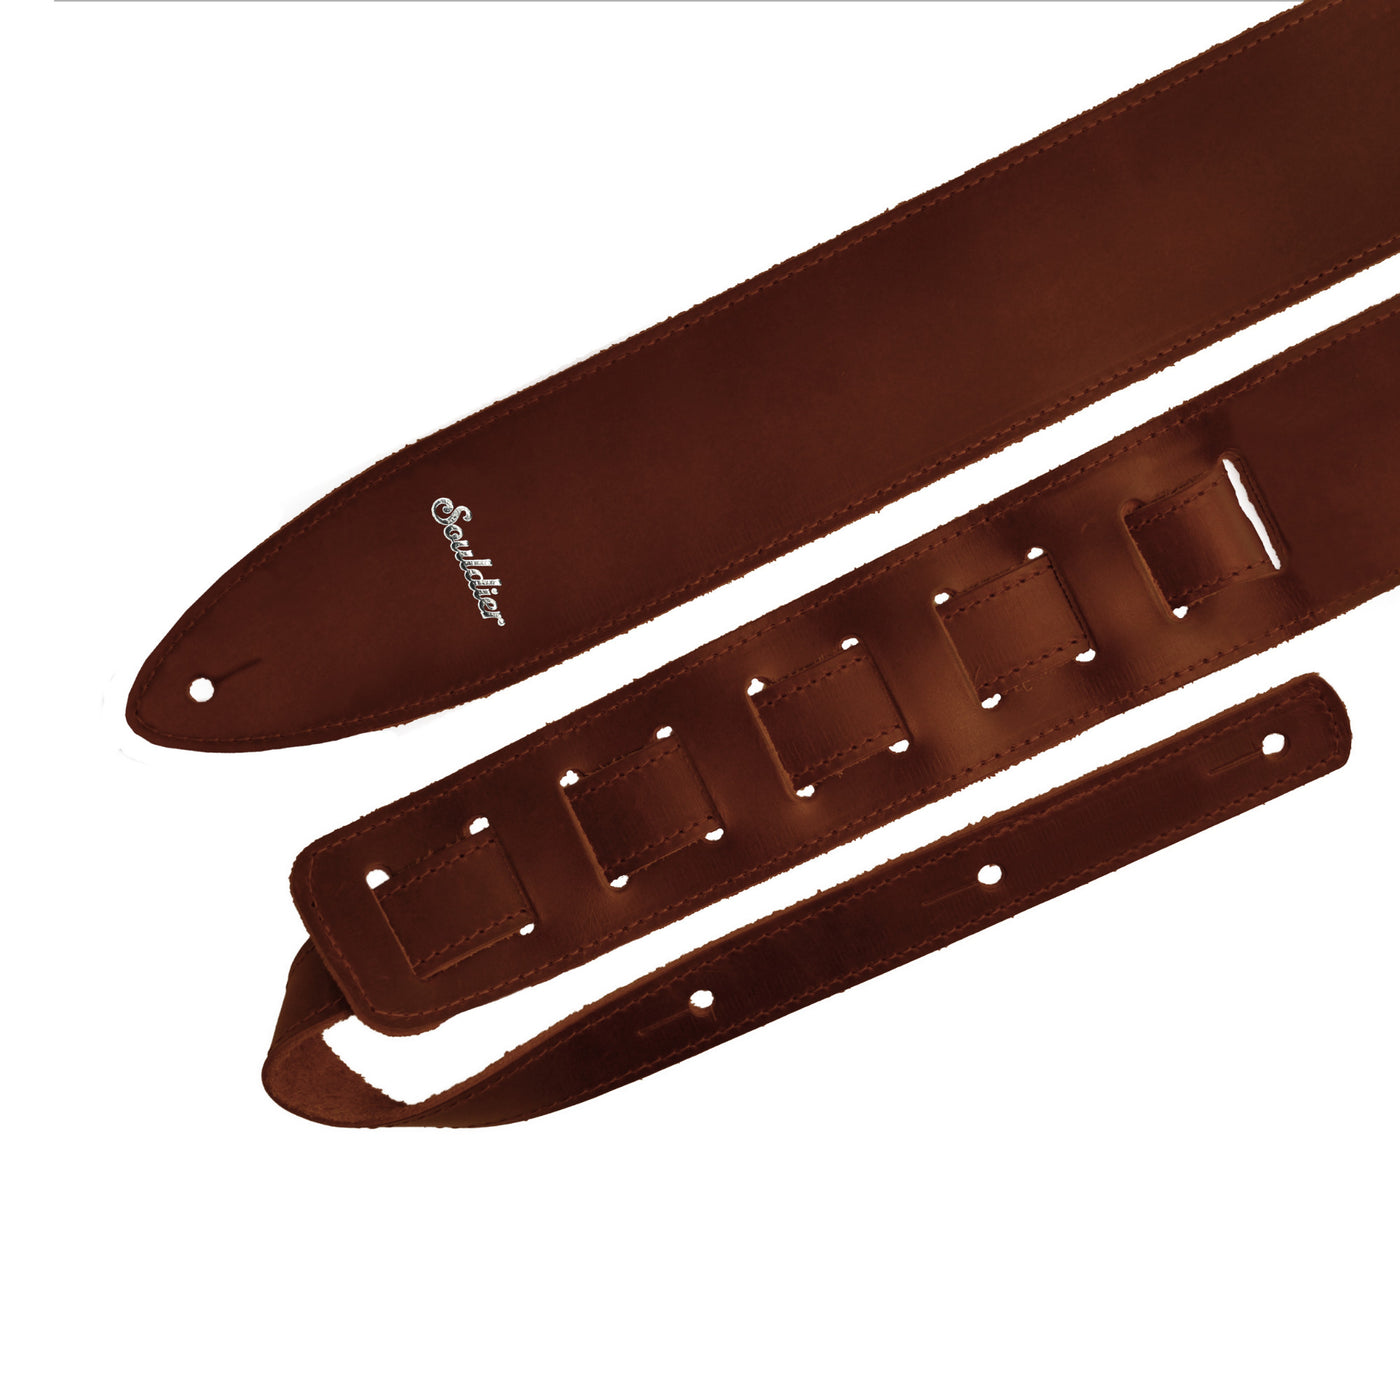 Souldier TGS0000BR02BR - Handmade Souldier Solid Torpedo Strap for Bass, Electric, or Acoustic Guitar, Adjustable Length from 42.5" to 55" Made in the USA, Brown